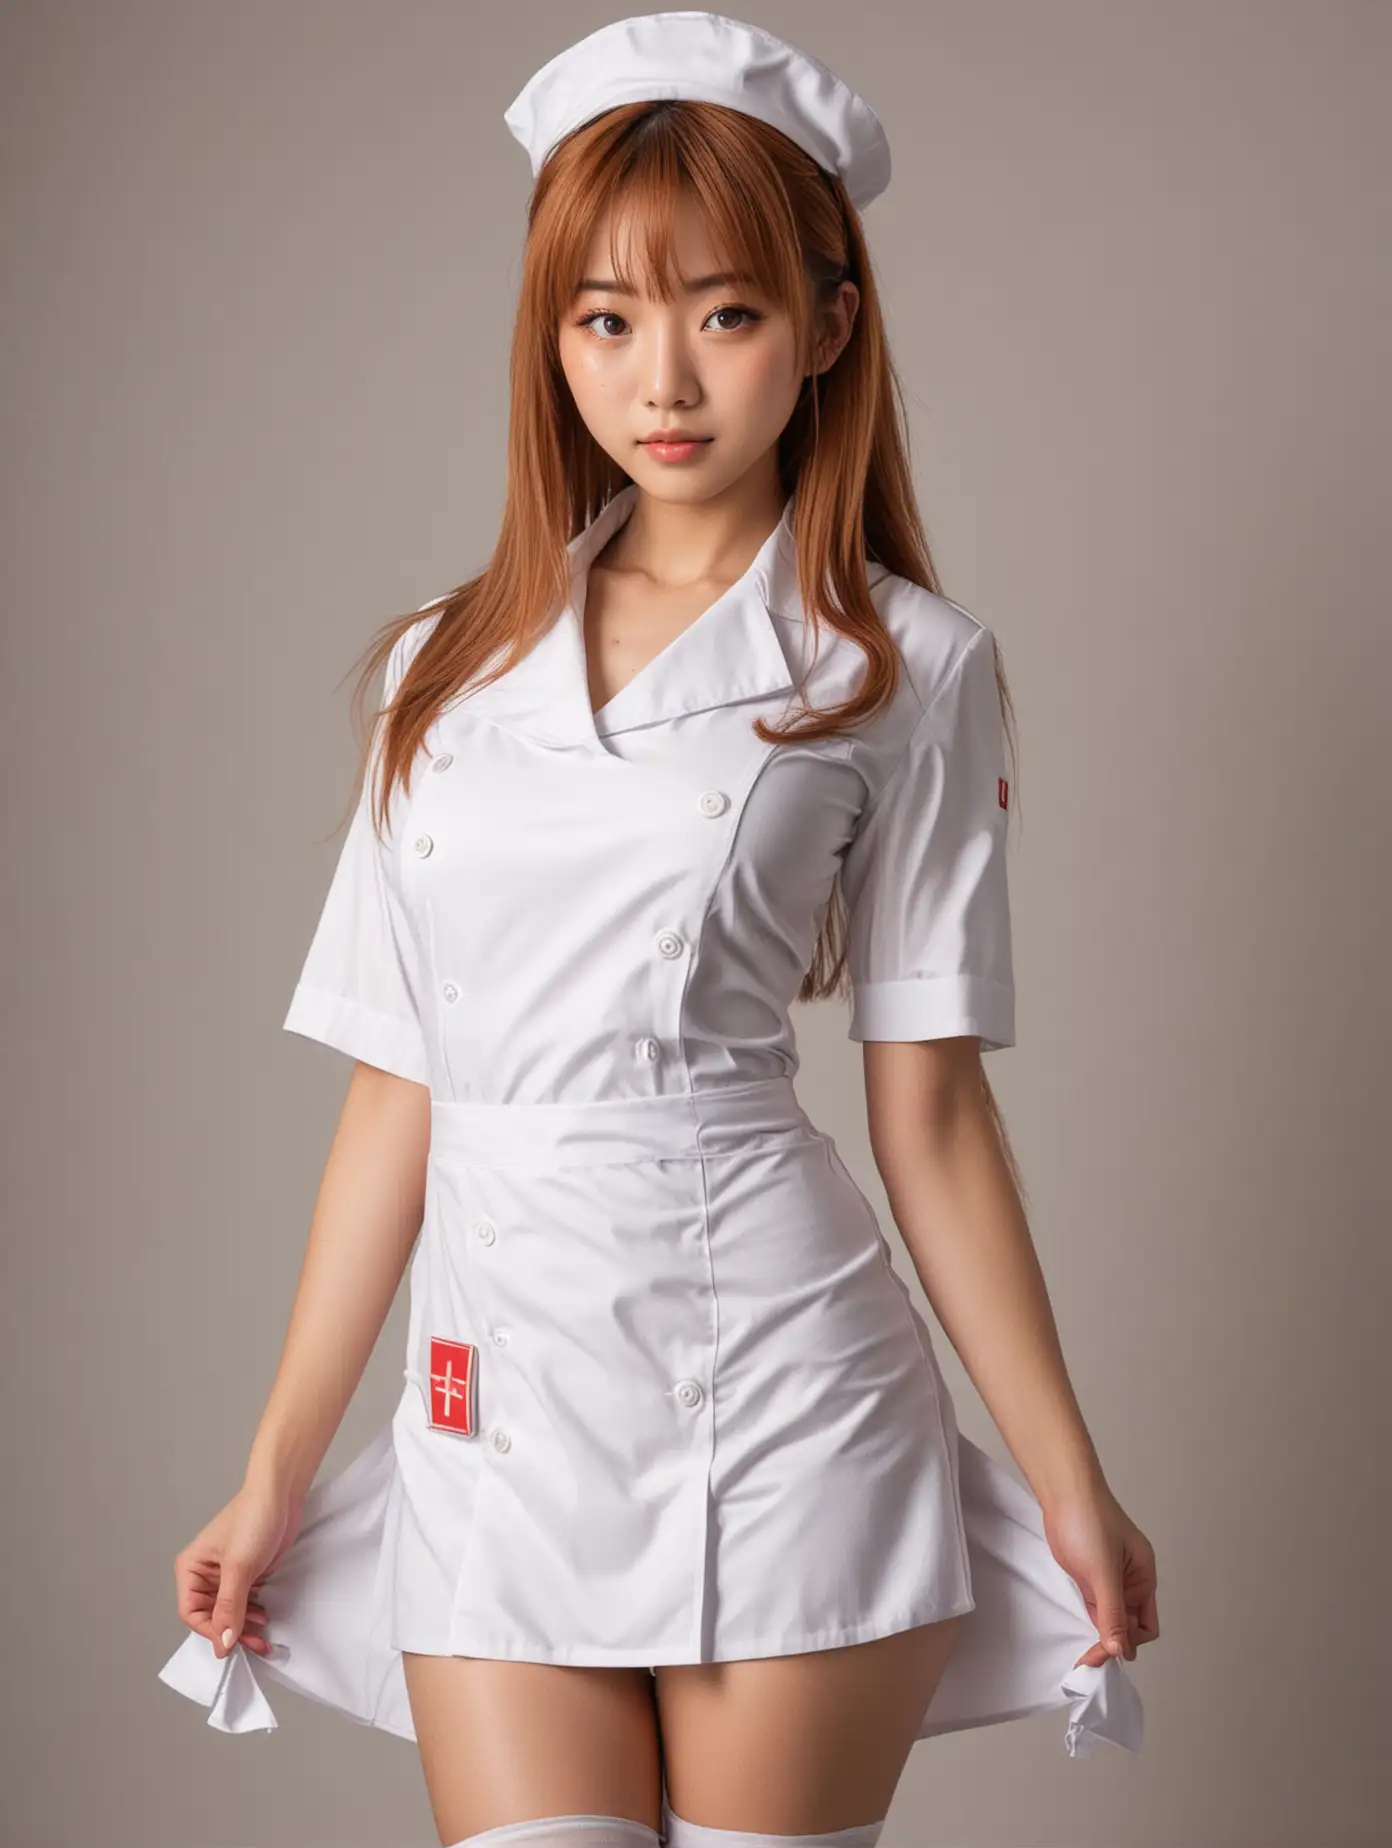 Fullbody Japanese girl with caramel-colored medium length hair, freckles and huge amber eyes. Posing sexy with nurse costume